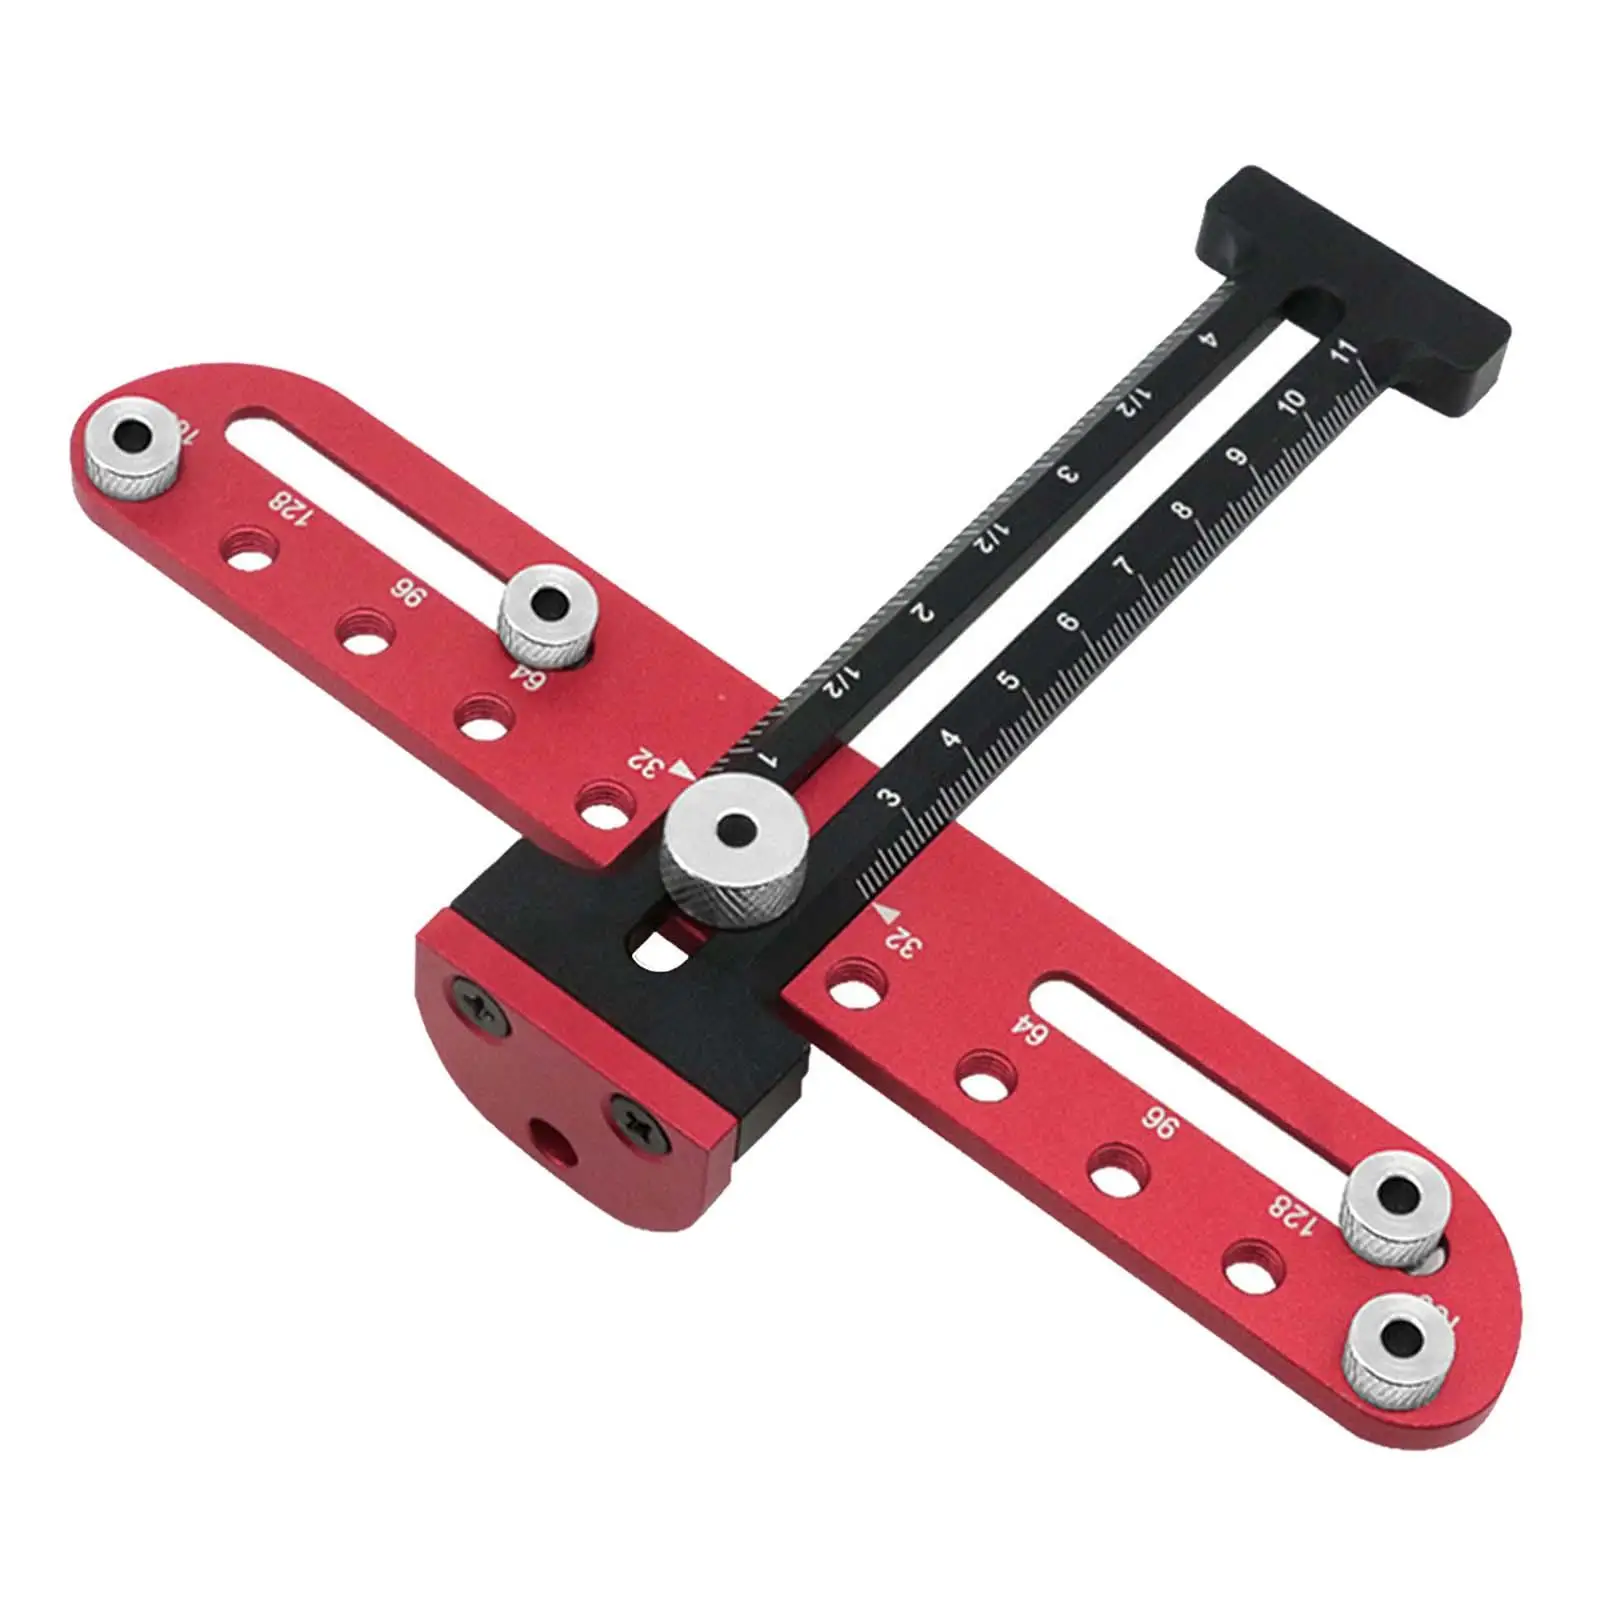 Hole Punch , Cabinet Hardware Power Tool Punch Stainless Steel Adjustable punch Template,